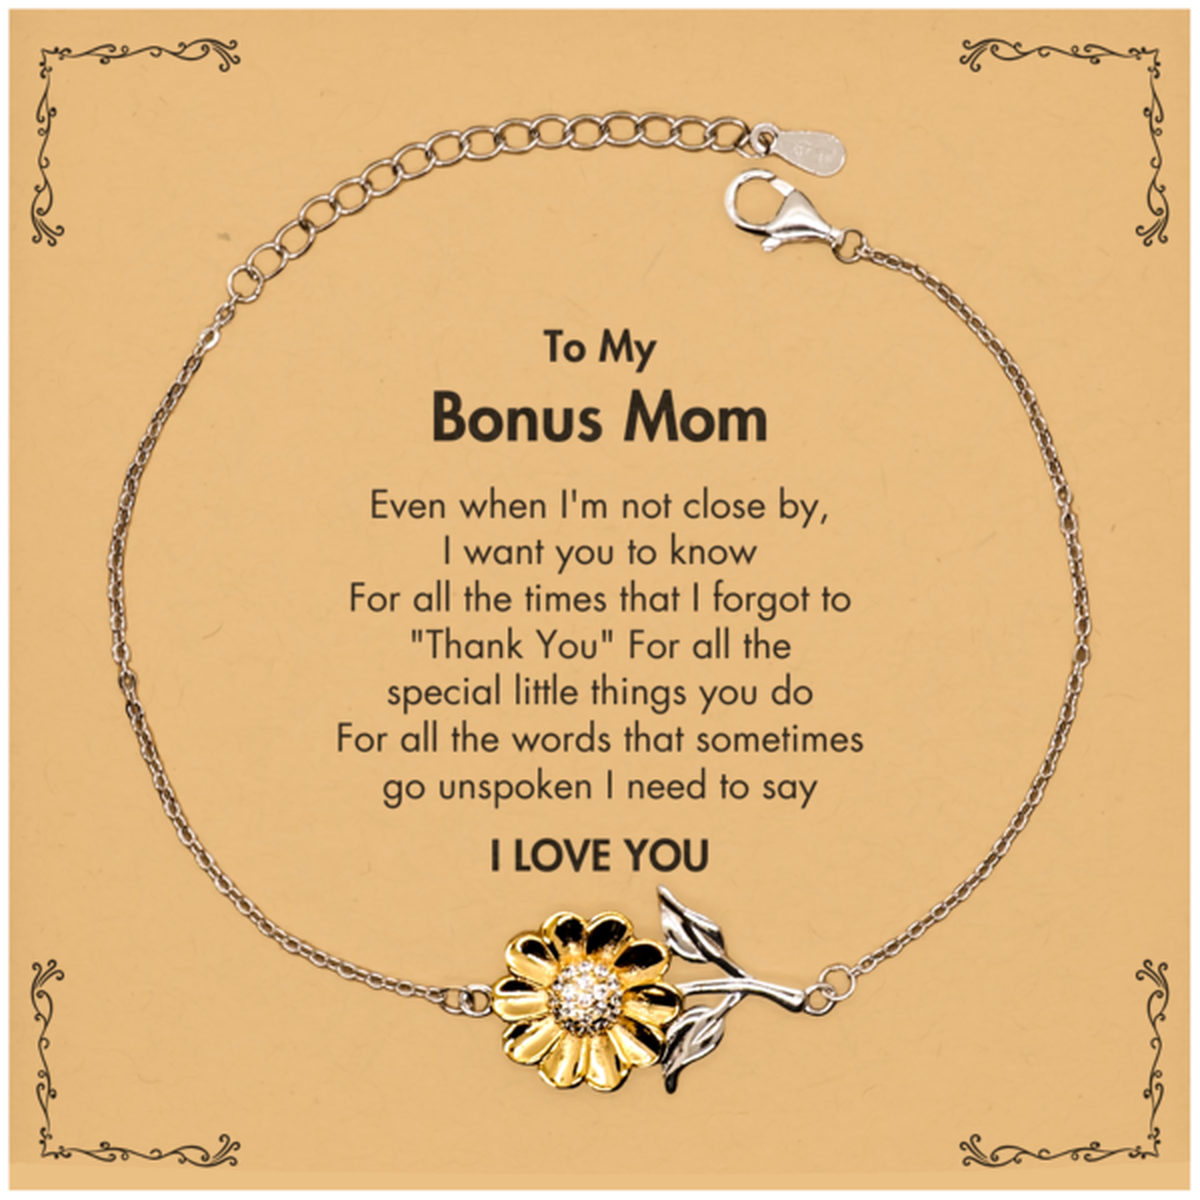 Thank You Gifts for Bonus Mom, Keepsake Sunflower Bracelet Gifts for Bonus Mom Birthday Mother's day Father's Day Bonus Mom For all the words That sometimes go unspoken I need to say I LOVE YOU